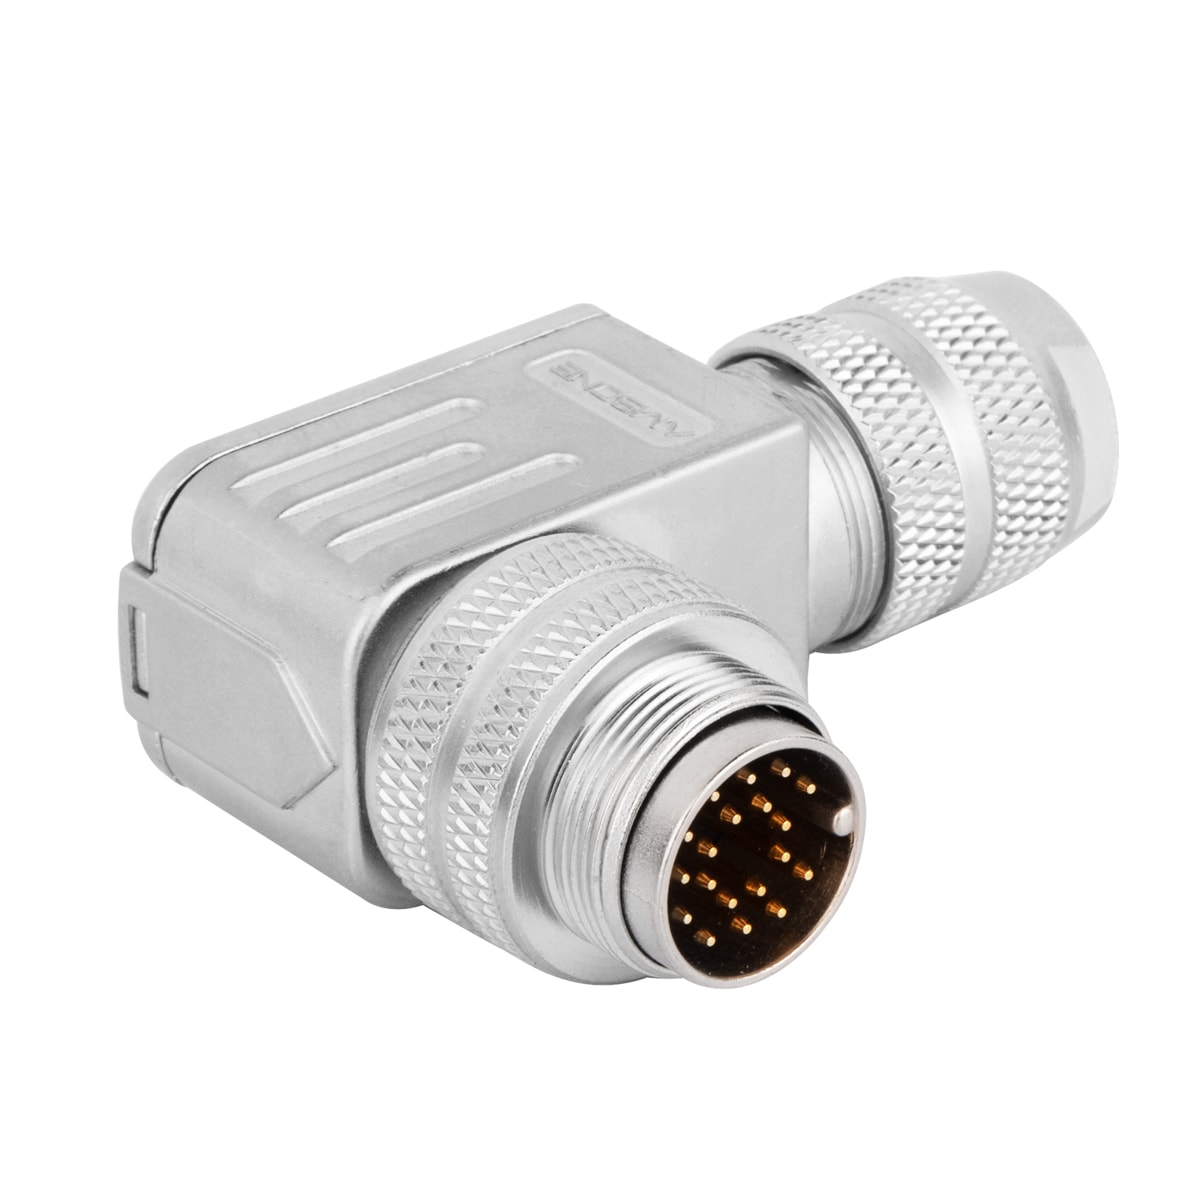 M16 cable connector, male, contacts:19, field assembly type, solder connection, right angled, IP67, UL certified